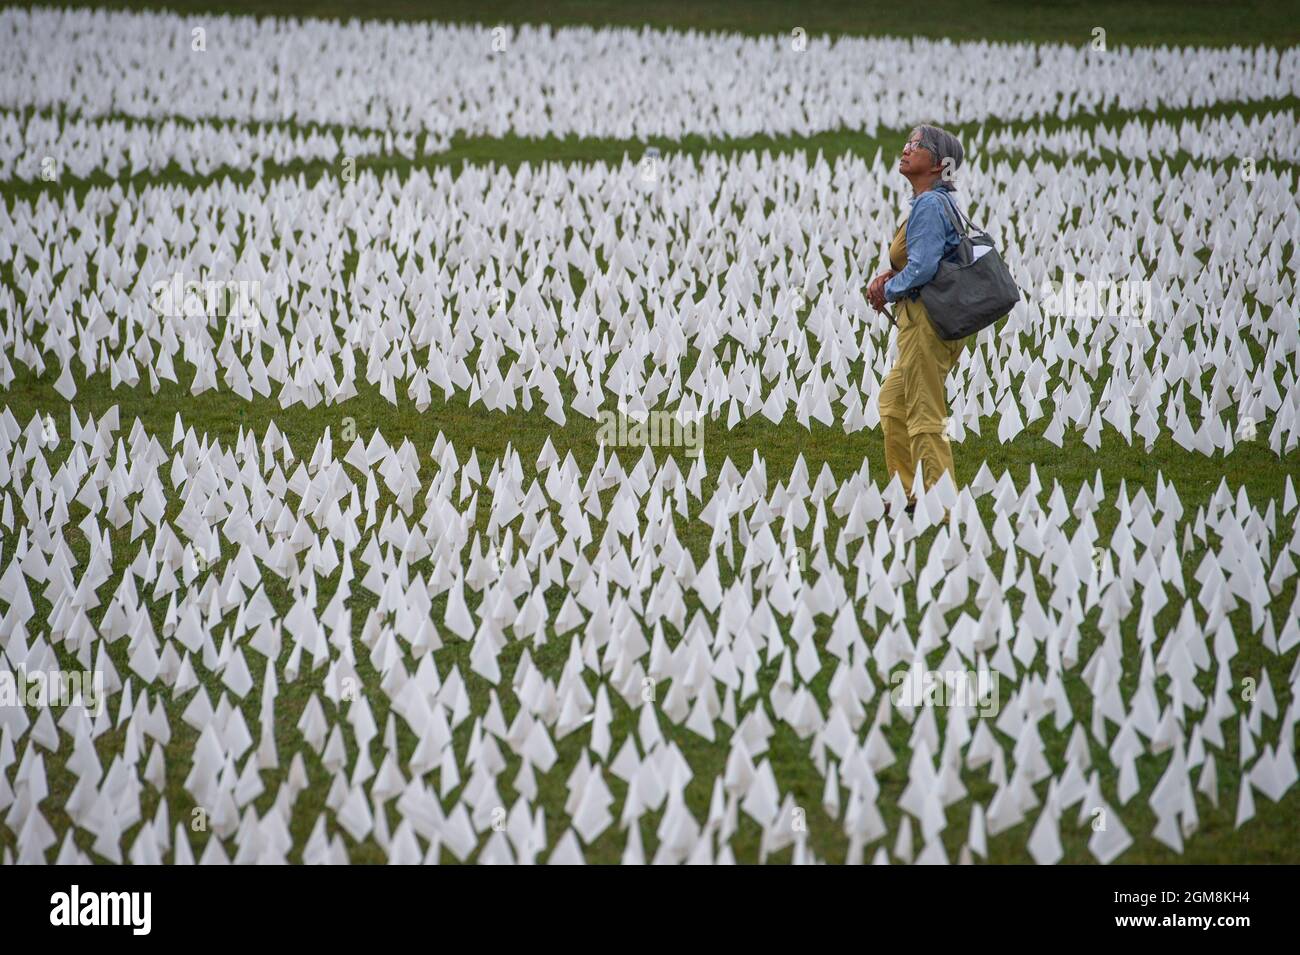 A woman walks among a field of some 660,000 white flags, representing the number of US lives lost to Covid-19, on the National Mall in Washington, DC, Thursday, September 16, 2021. The project, by artist Suzanne Brennan Firstenberg, titled “In America: Remember”, will be on display September 17, 2021 through October 3, 2021. Credit: Rod Lamkey / CNP/Sipa USA Stock Photo